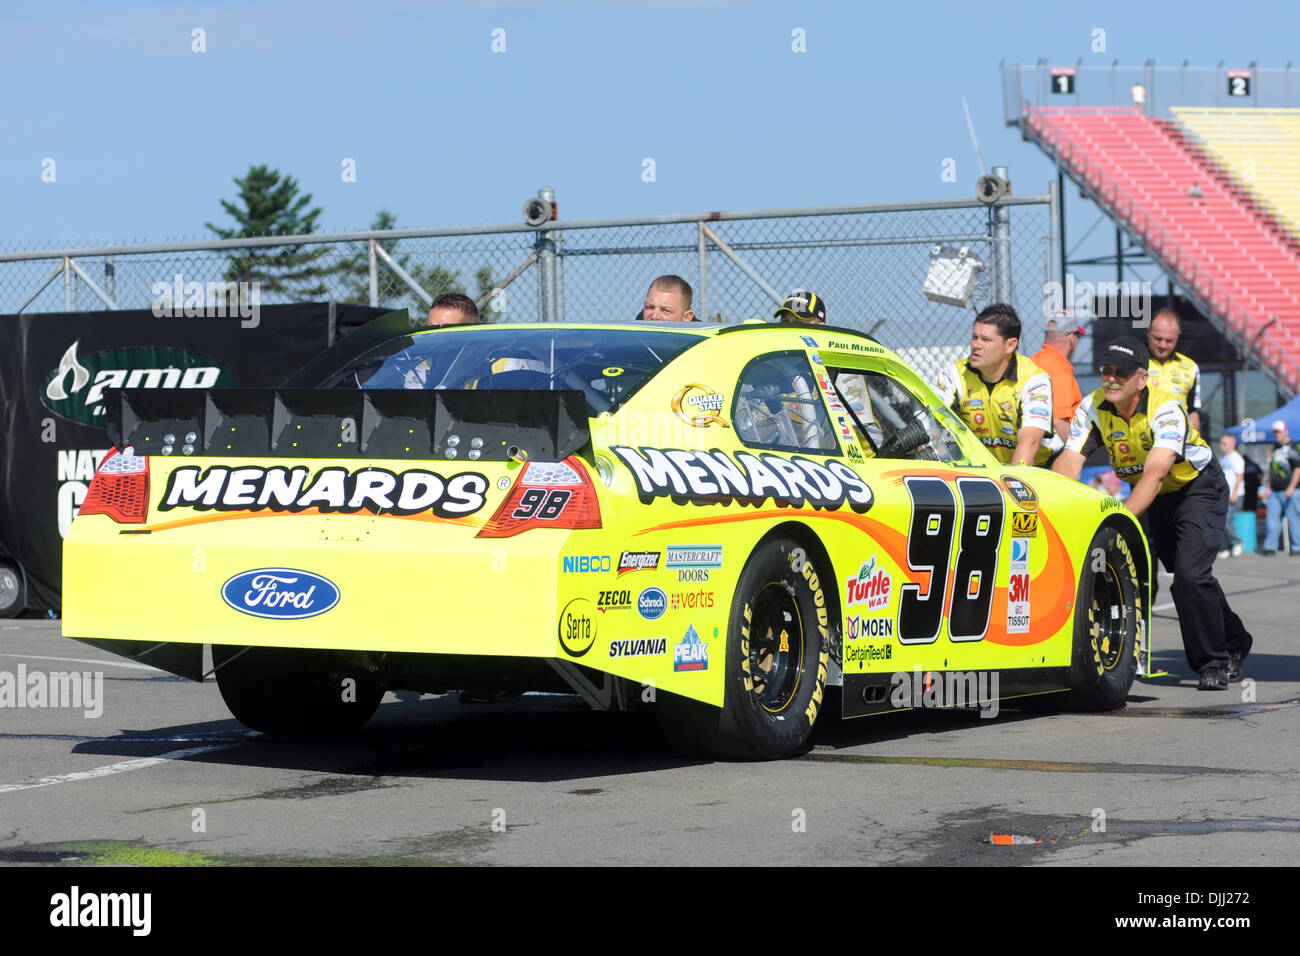 Aug. 06, 2010 - Watkins Glen, New York, United States of America - 6 August 2010: The crew of the #98 Menards Ford of driver PAUL MENARD pushes the car back through the garage before practice for the Heluva Good! Sour Cream Dips at the Glen Sprint Cup Series race at Watkins Glen, New York..Mandatory Credit: Michael Johnson / Southcreek Global (Credit Image: © Southcreek Global/ZUMA Stock Photo